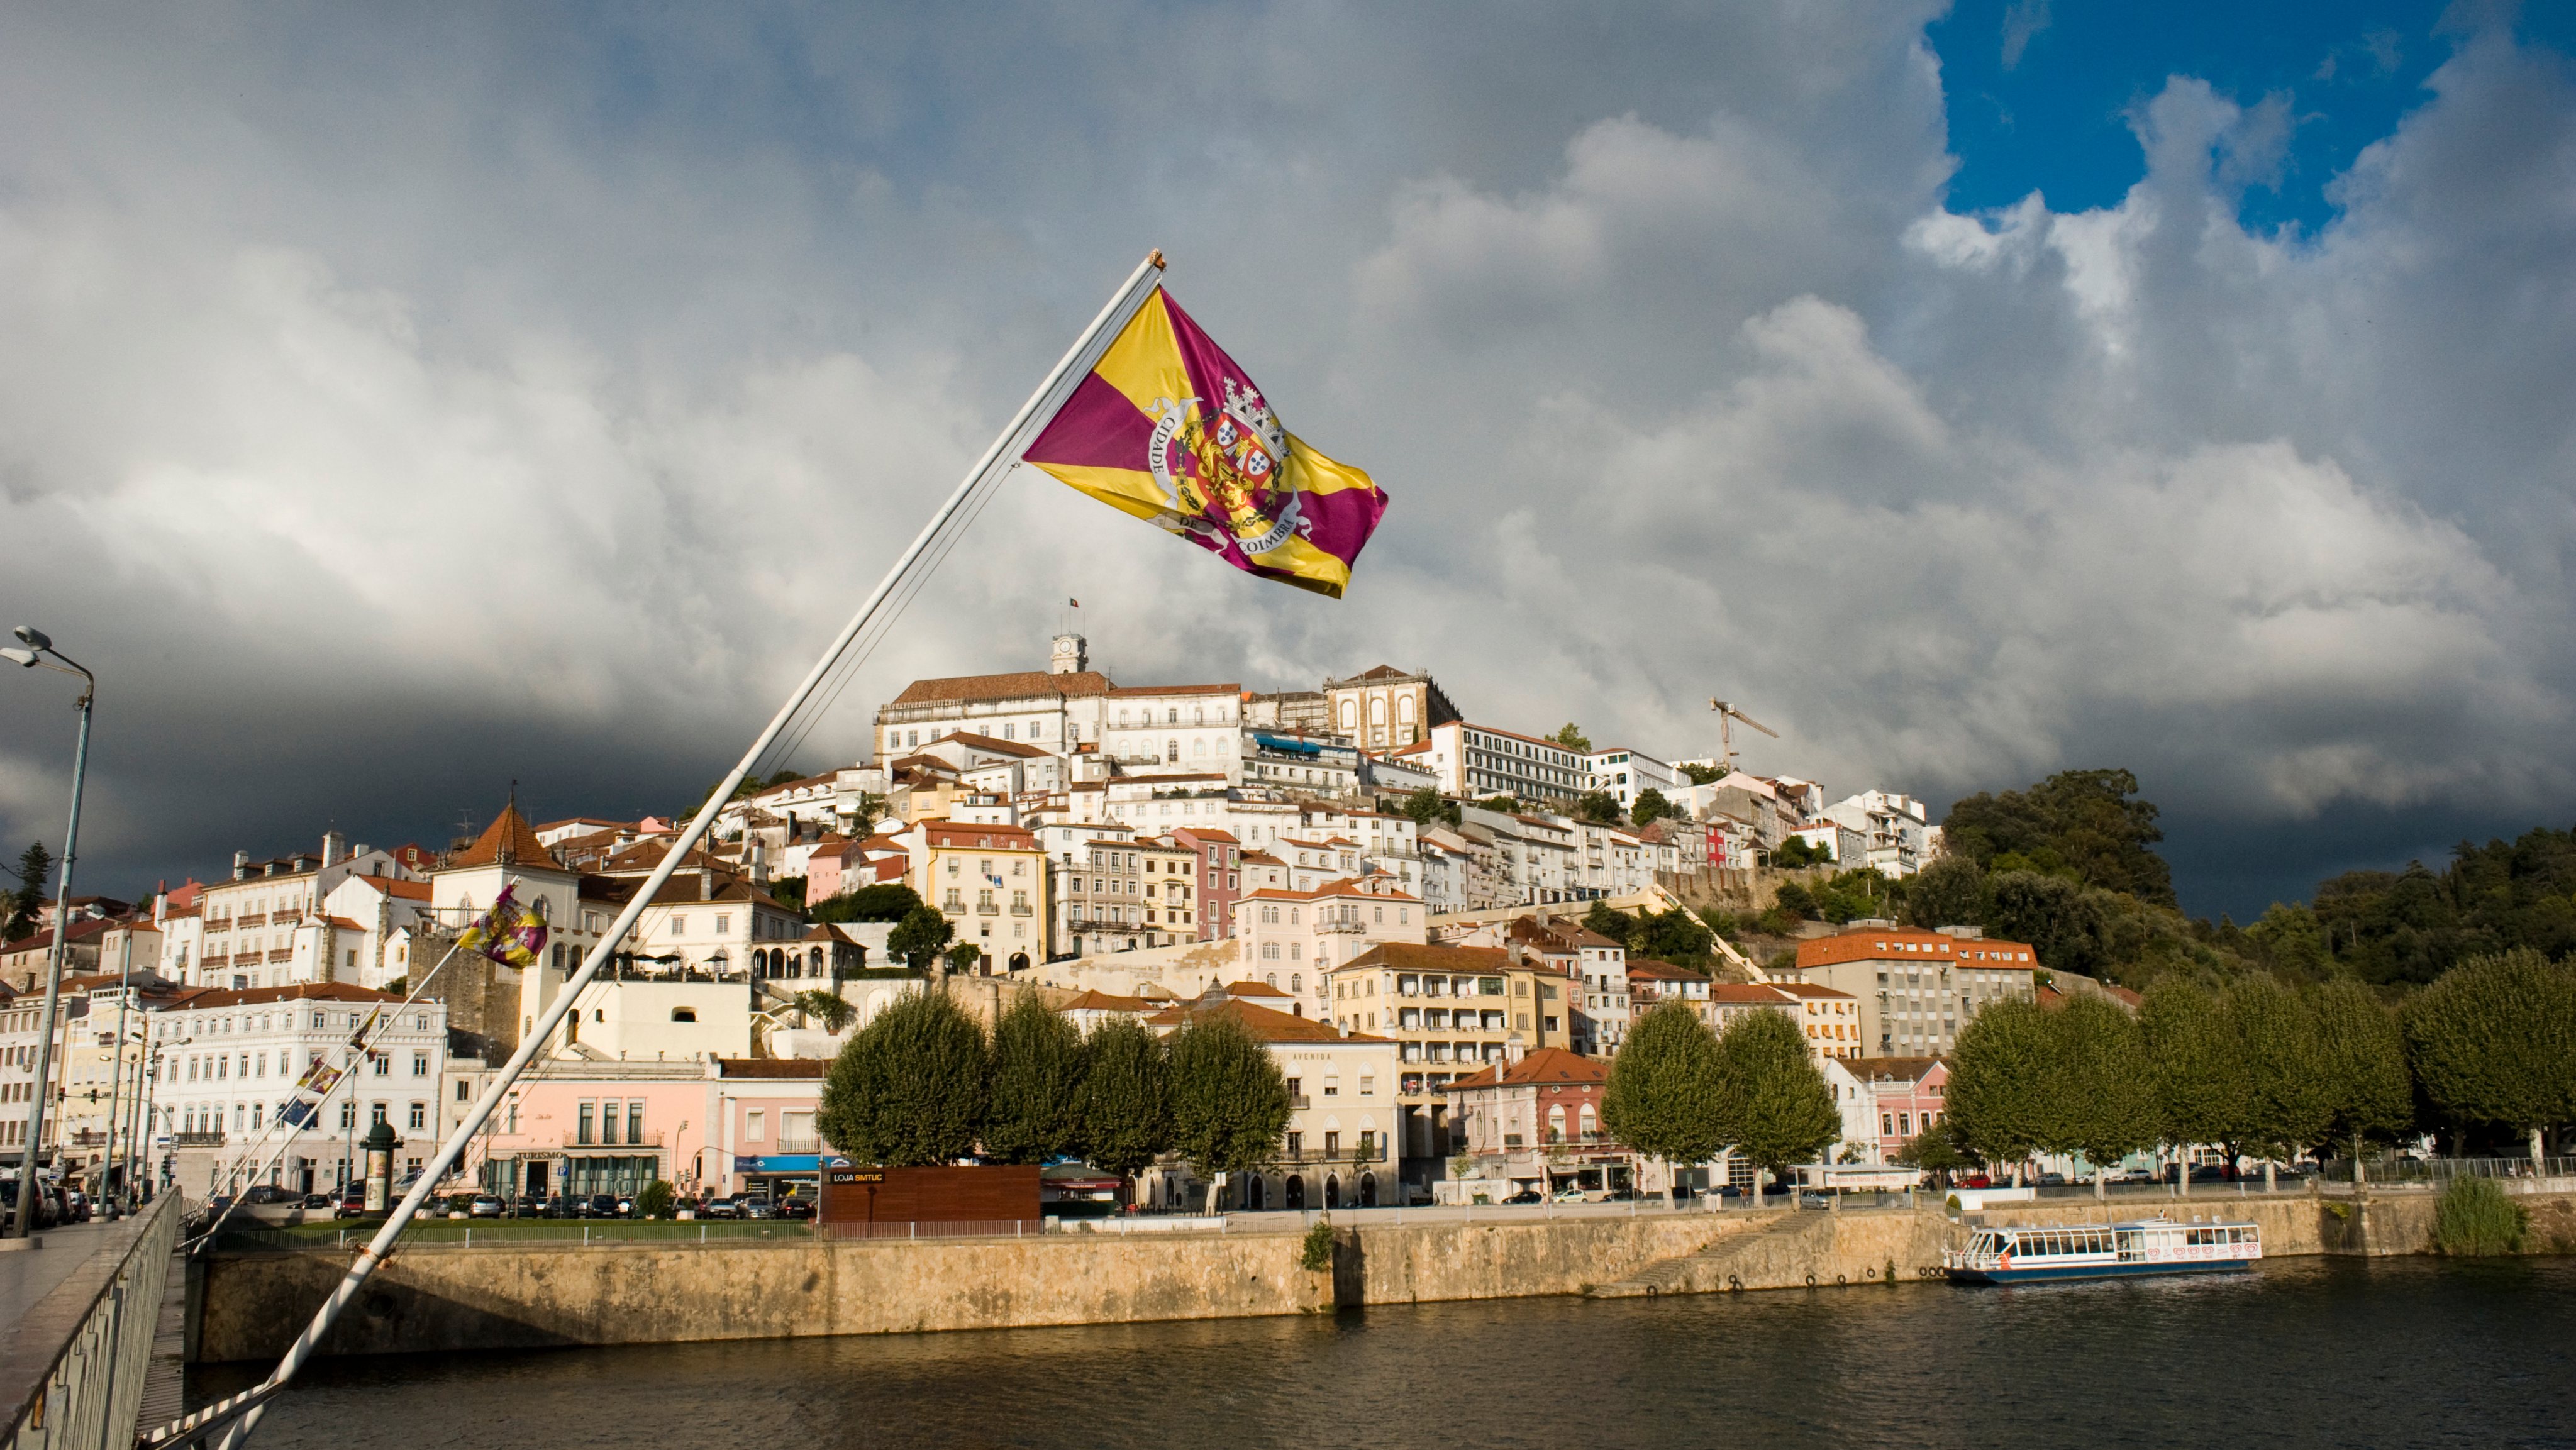 A flag flies in front of a view of the old city from the